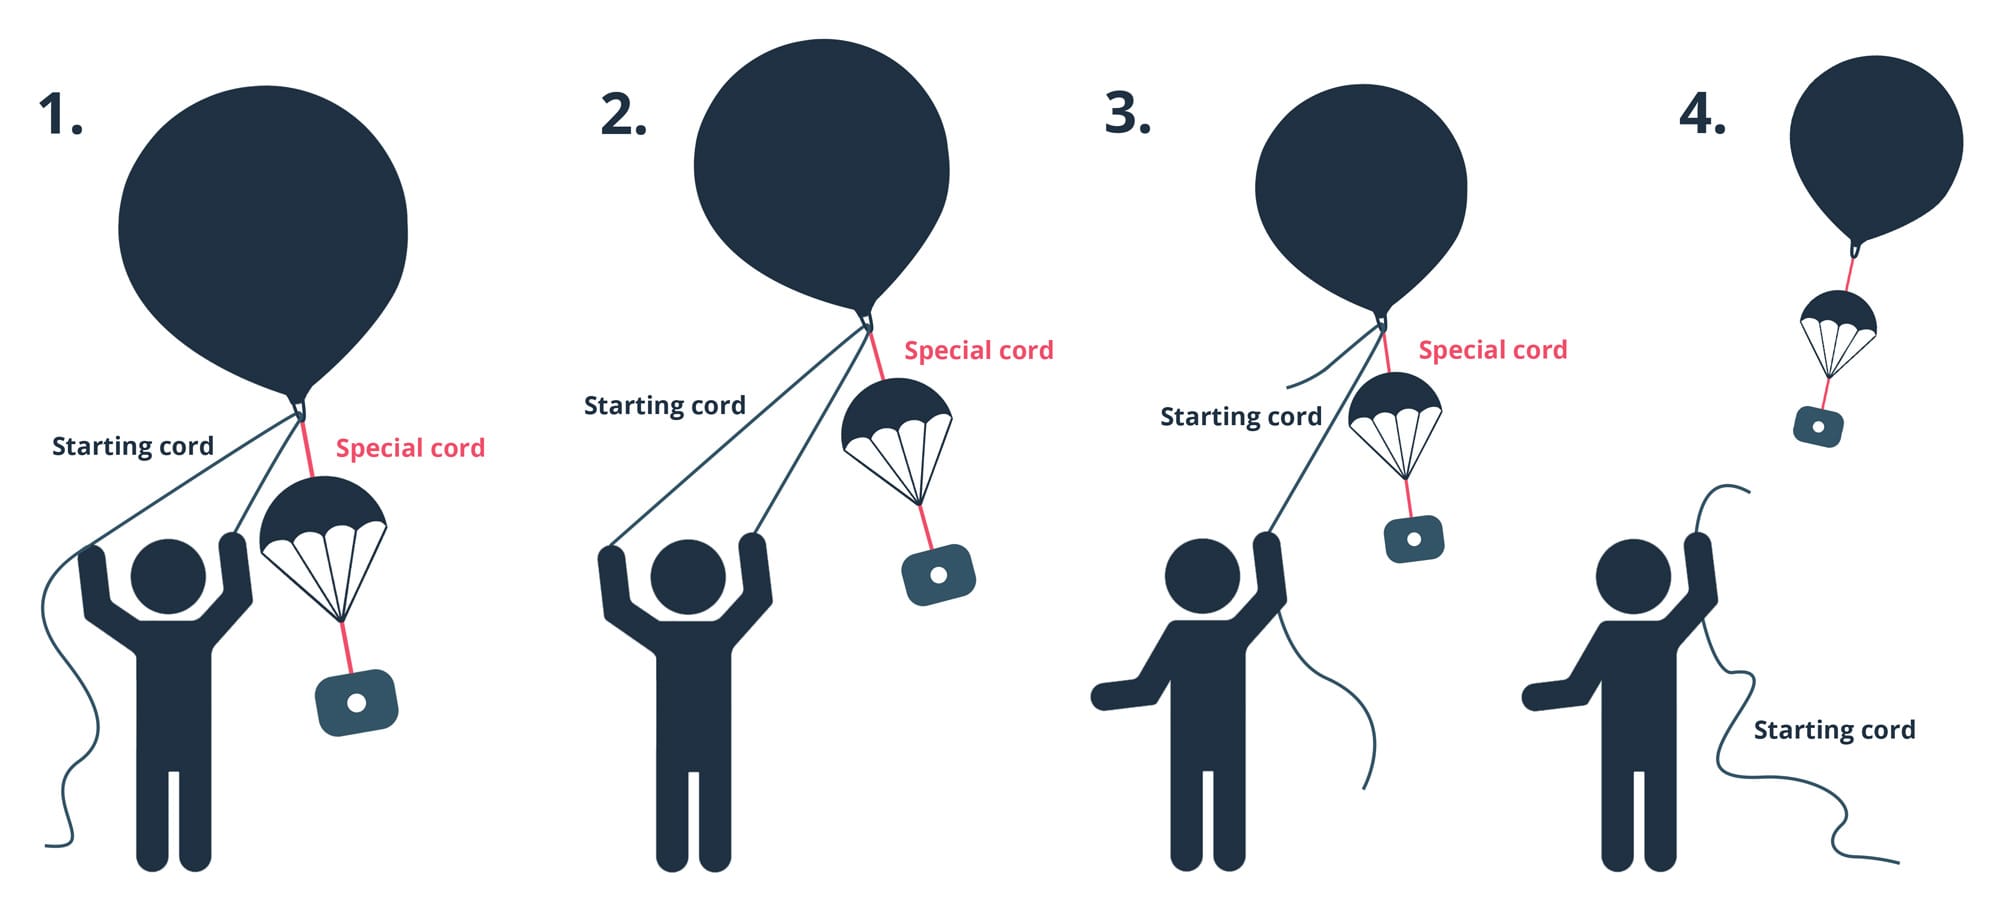 Launching the weather balloon on the starting cord